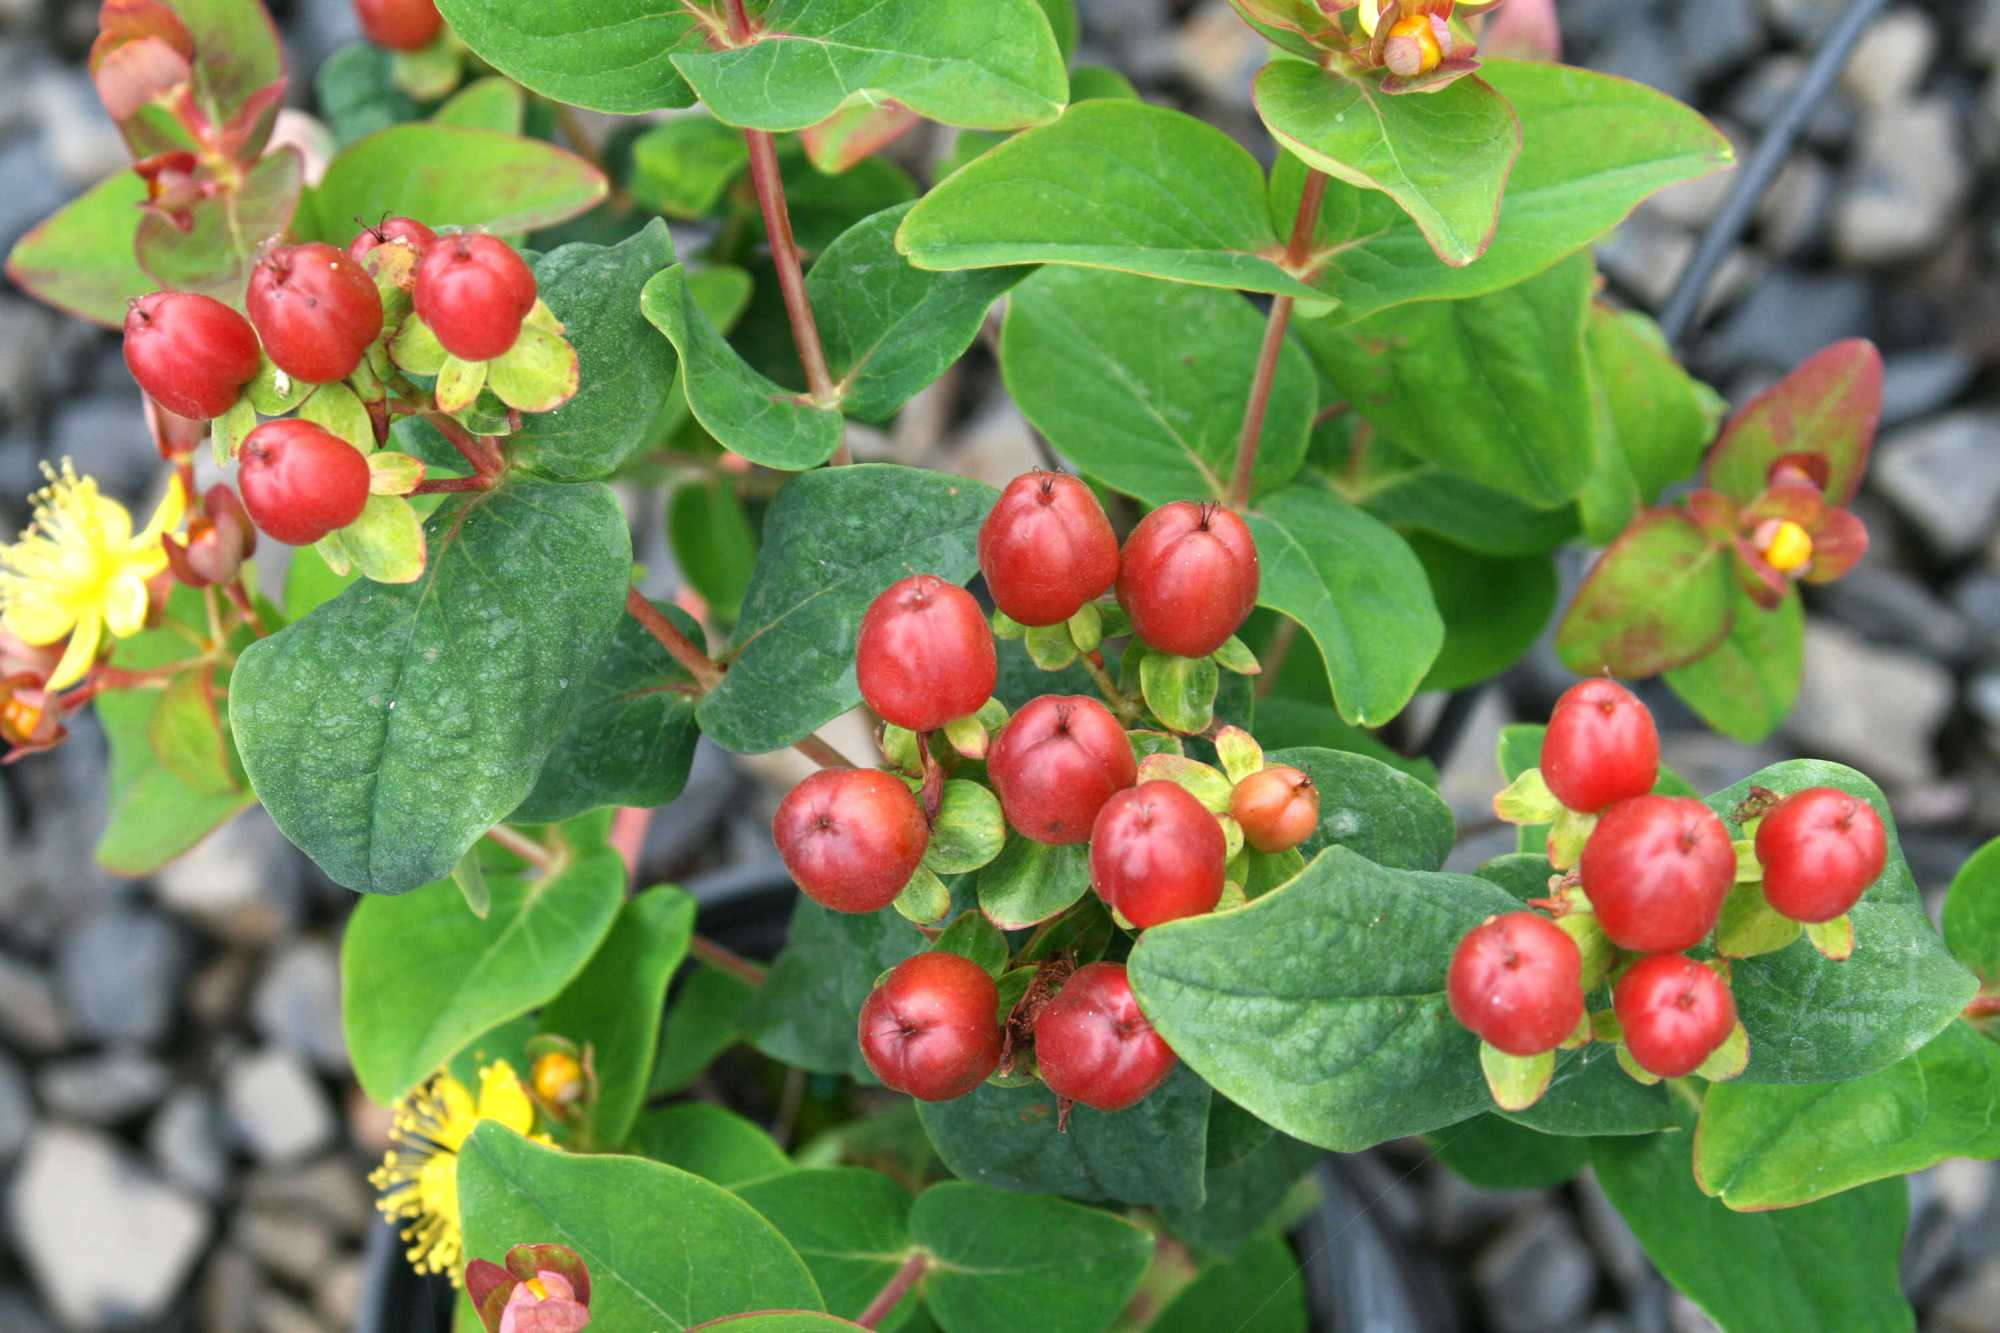 15 New Crops To Extend The Fall Season [Slideshow] - Greenhouse Grower